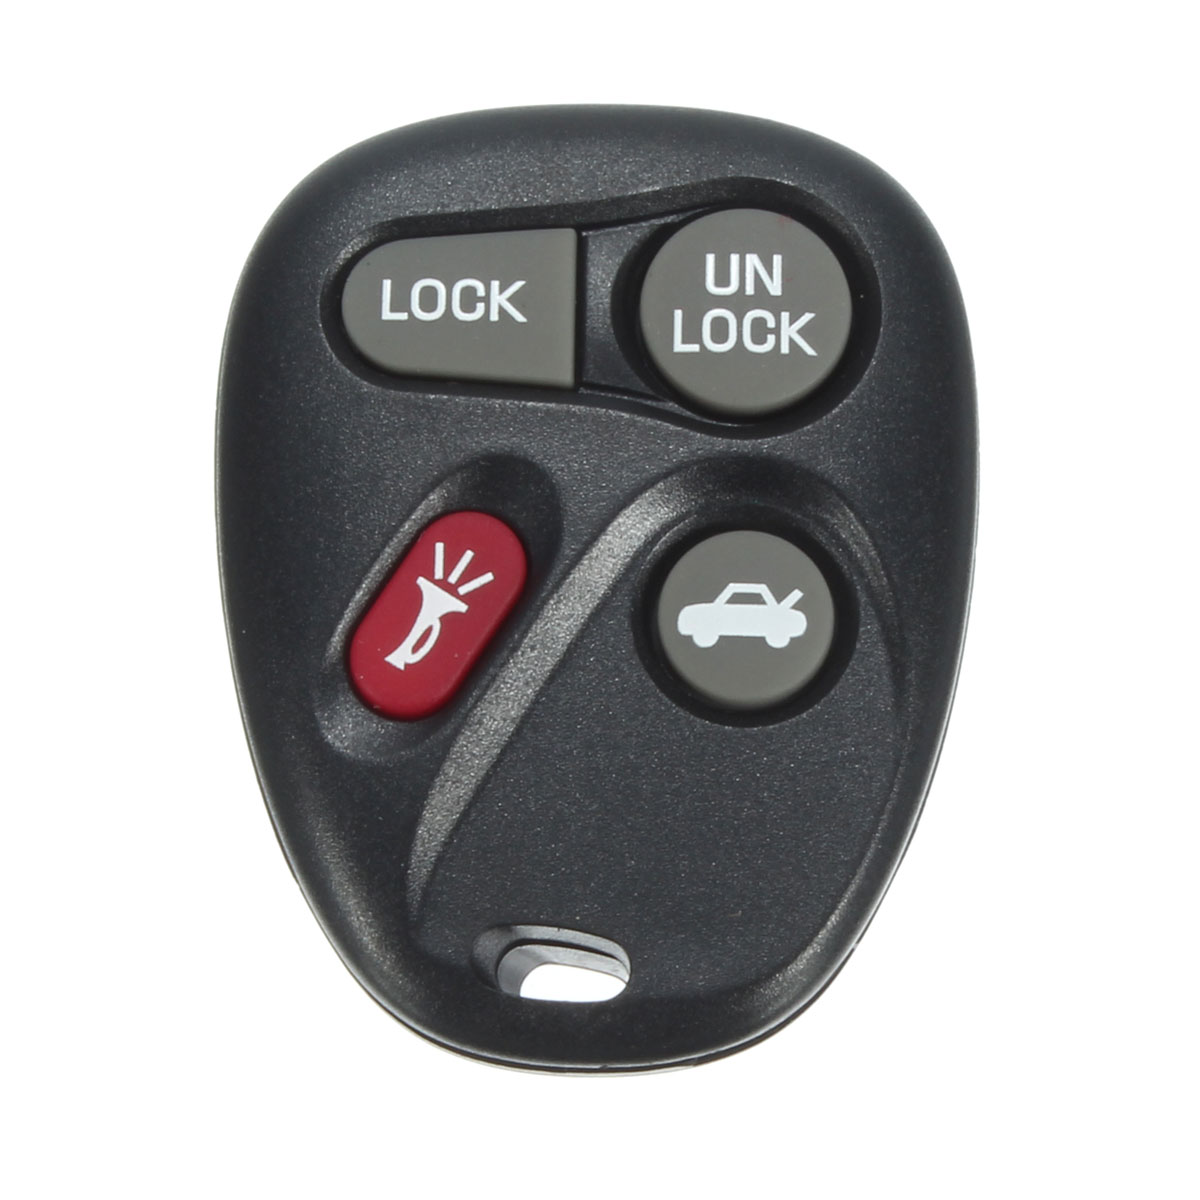 

4 Button Keyless Entry Remote Key Fob Alarm Transmitter Replacement For Chevrolet